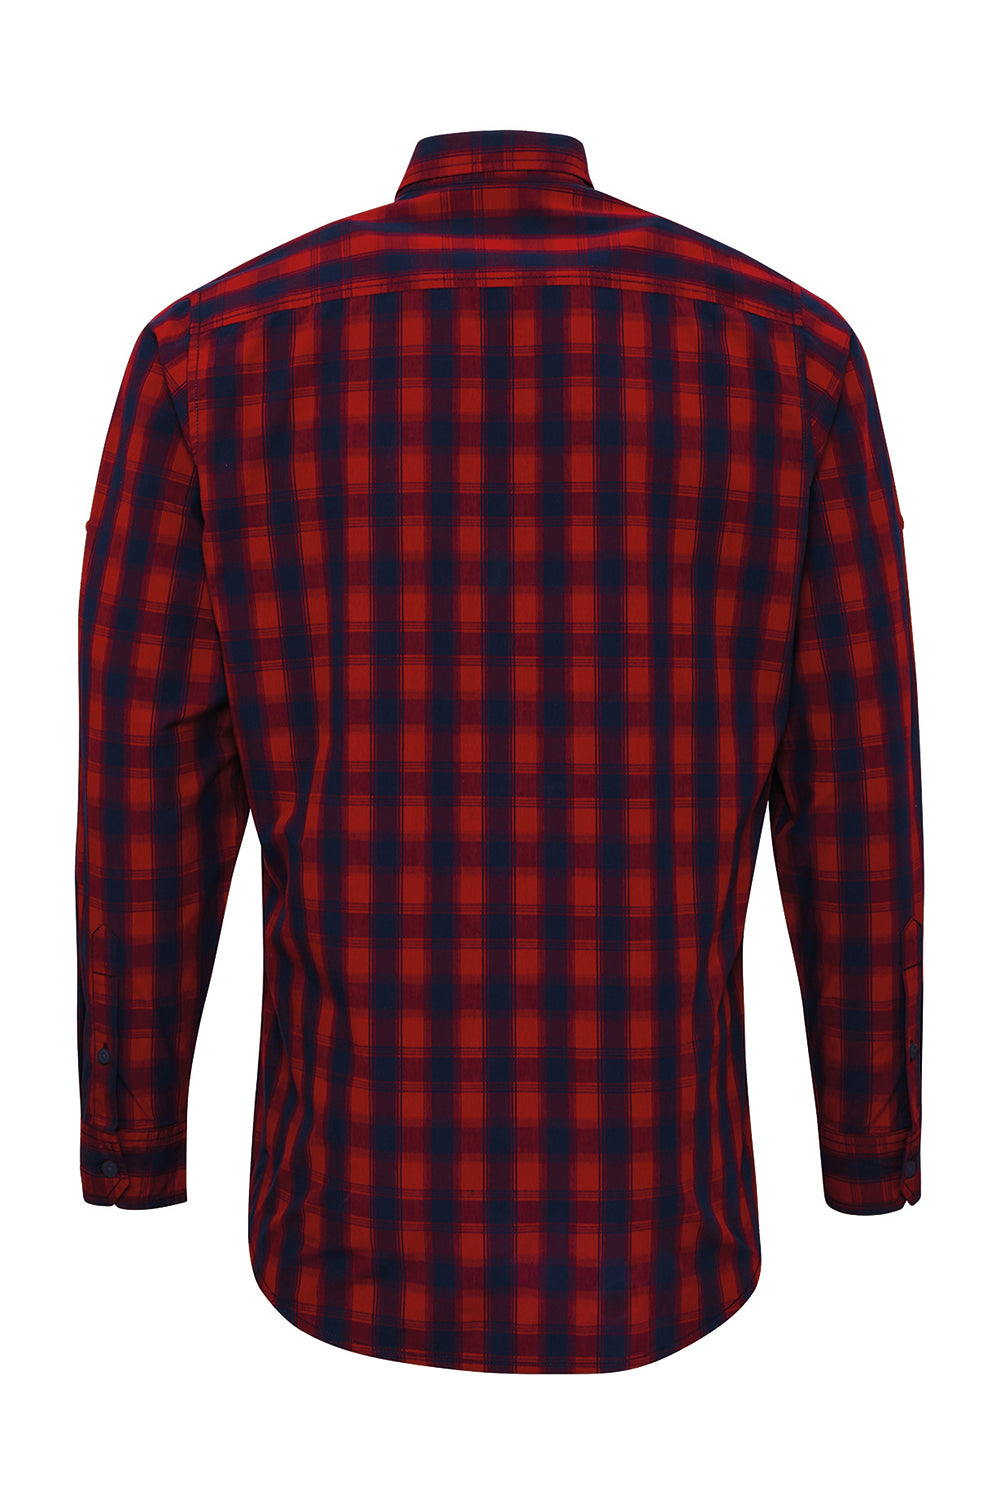 Artisan Collection RP250 Mens Mulligan Check Long Sleeve Button Down Shirt Red/Navy Blue Model Flat Back